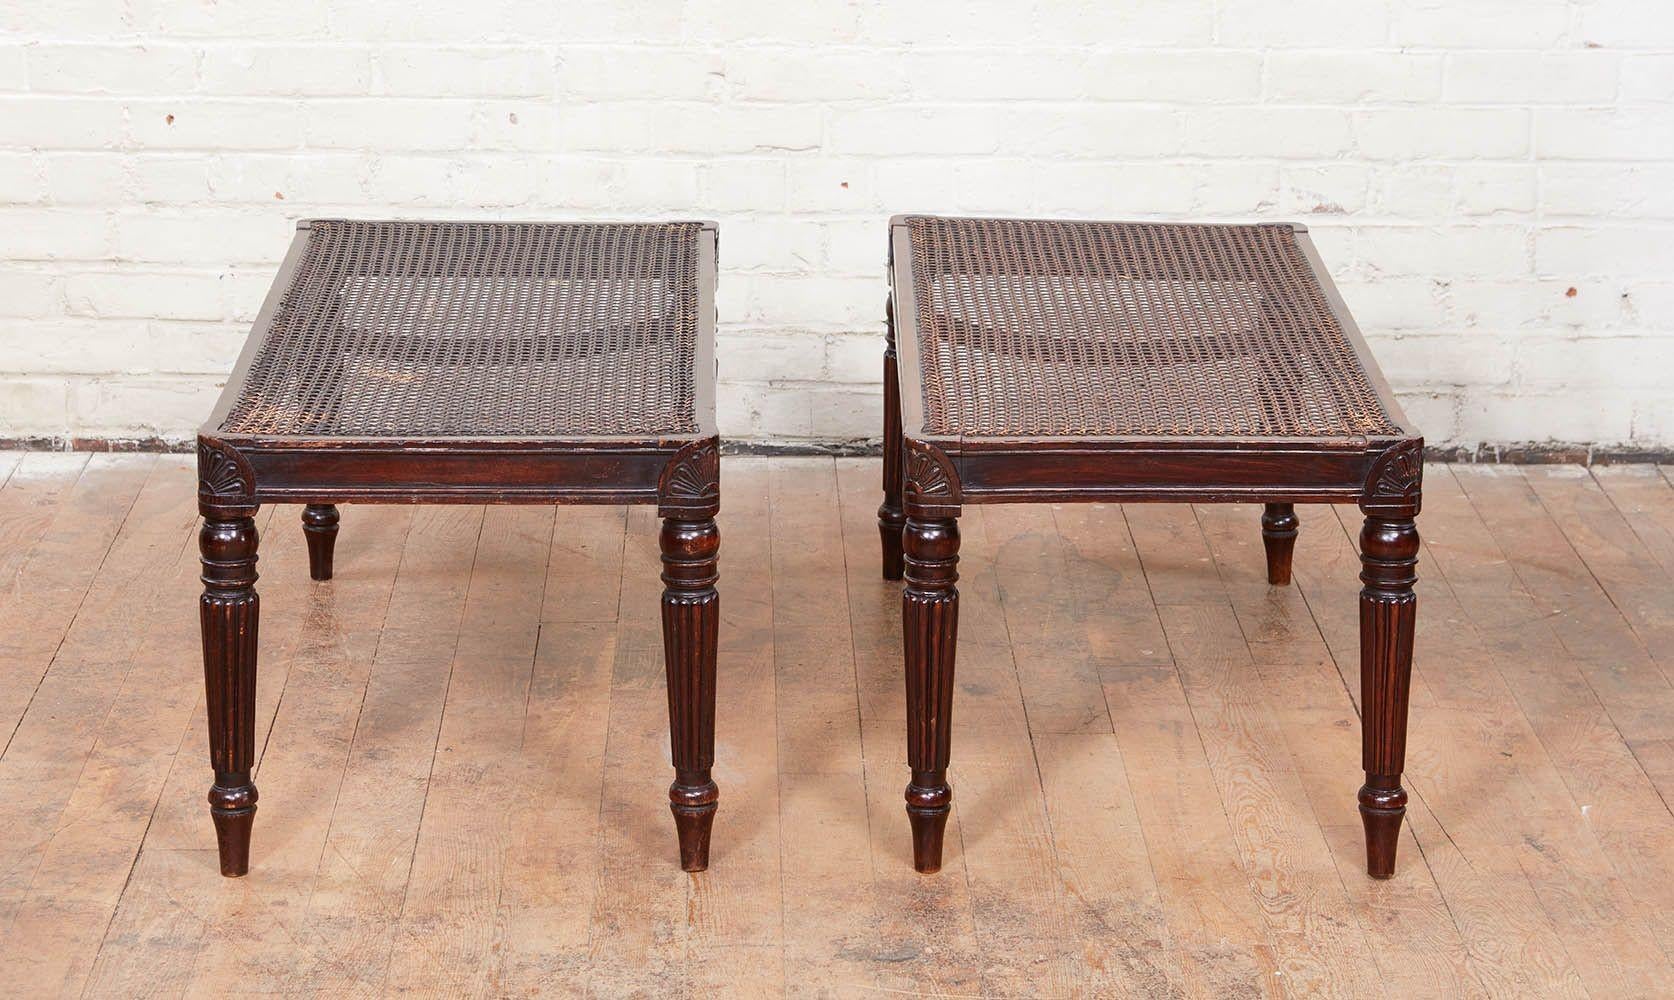 Good pair of Regency style benches, the cane seat over molded rails, the reeded legs with palmette carved corners, the whole of good design and proportion. Ready as is or with your choice fabric for loose cushion.
Partially comprising period